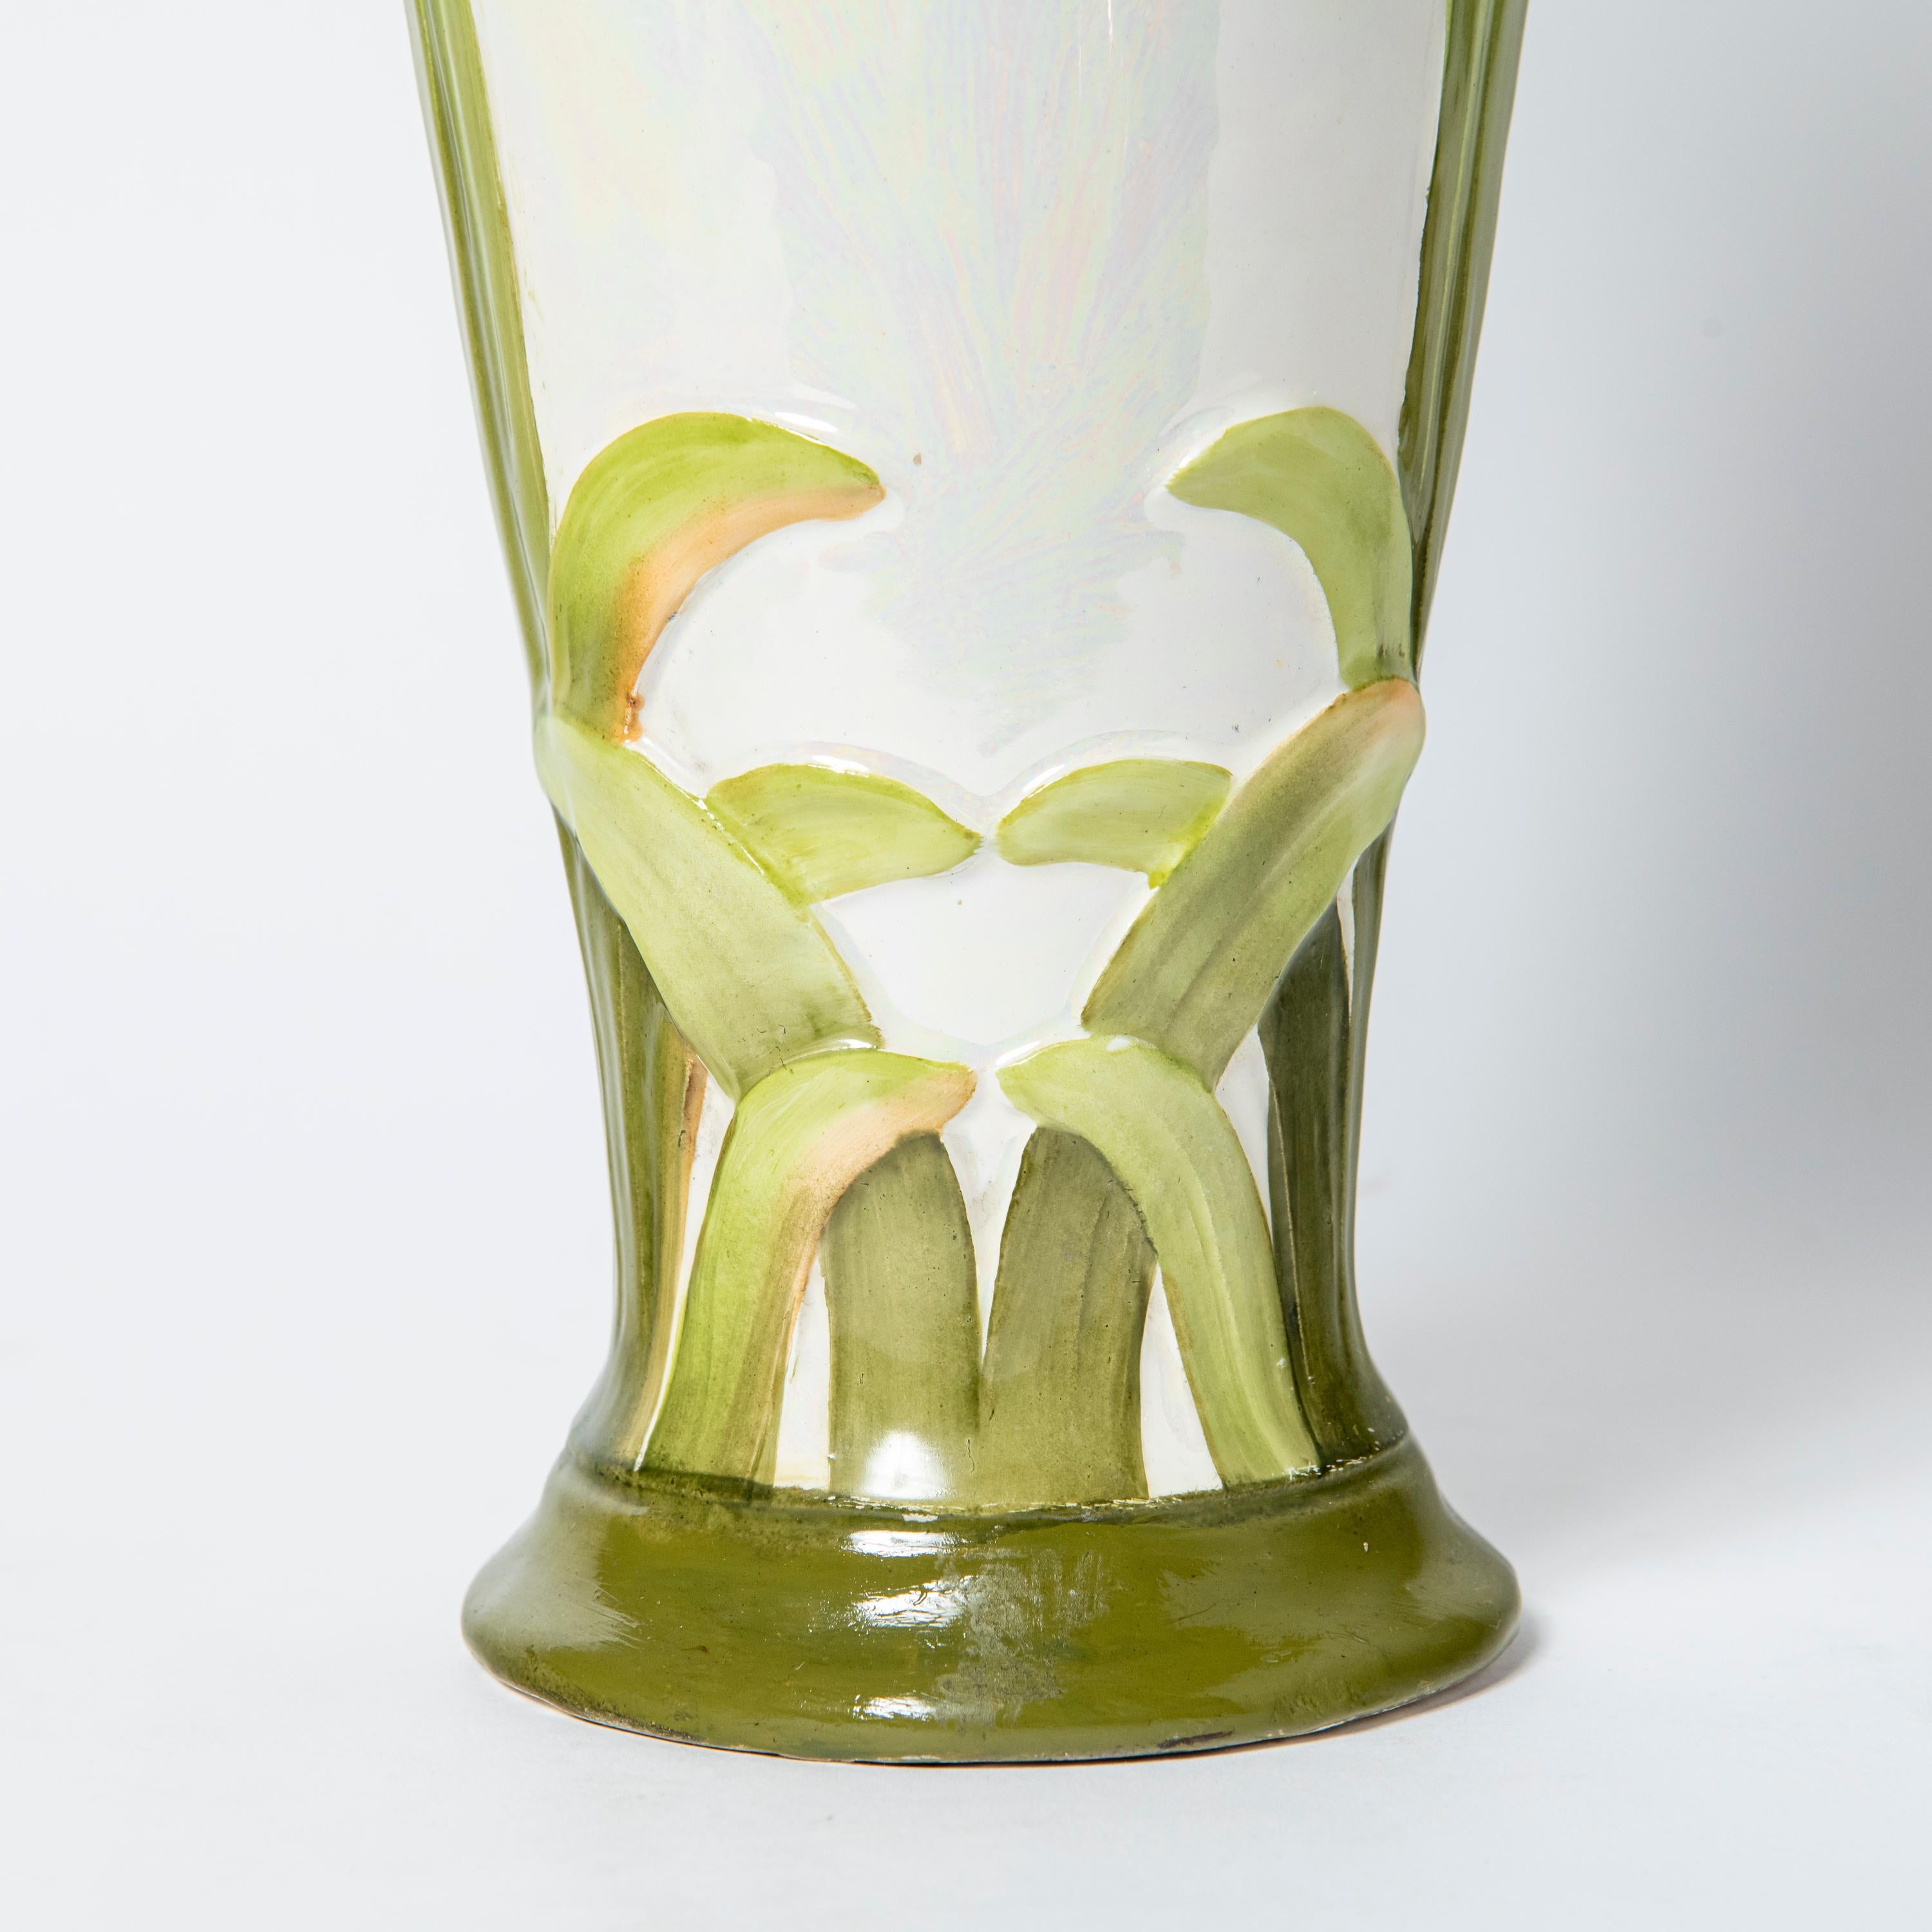  Glazed Ceramic vase, Art Nouveau Period, France, Early 20th Century. For Sale 3